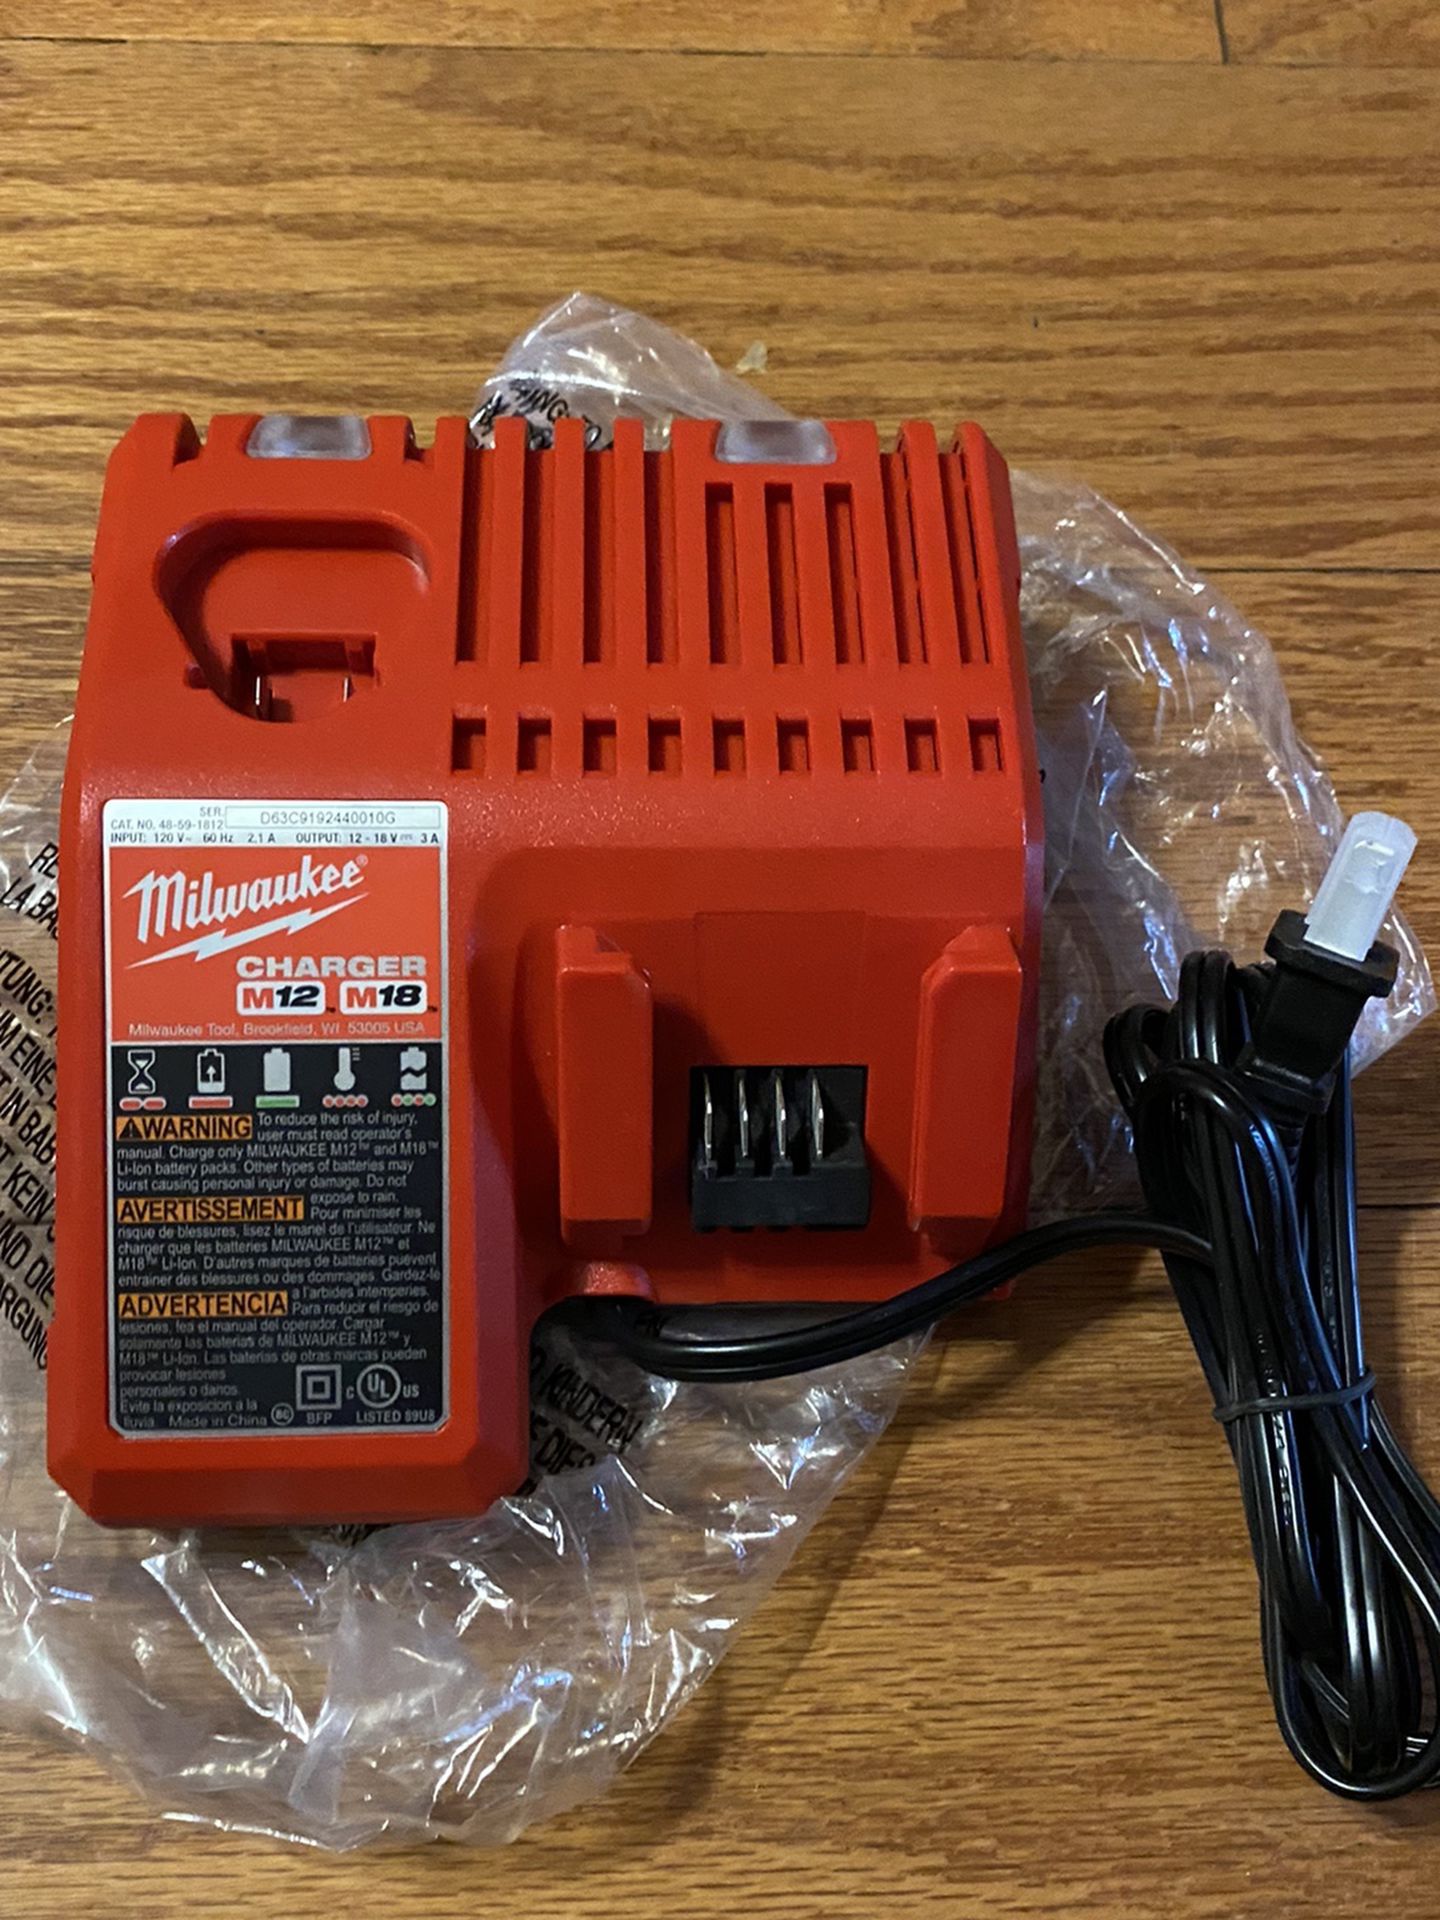 Brand New Milwaukee M12and M18 Dual Charger